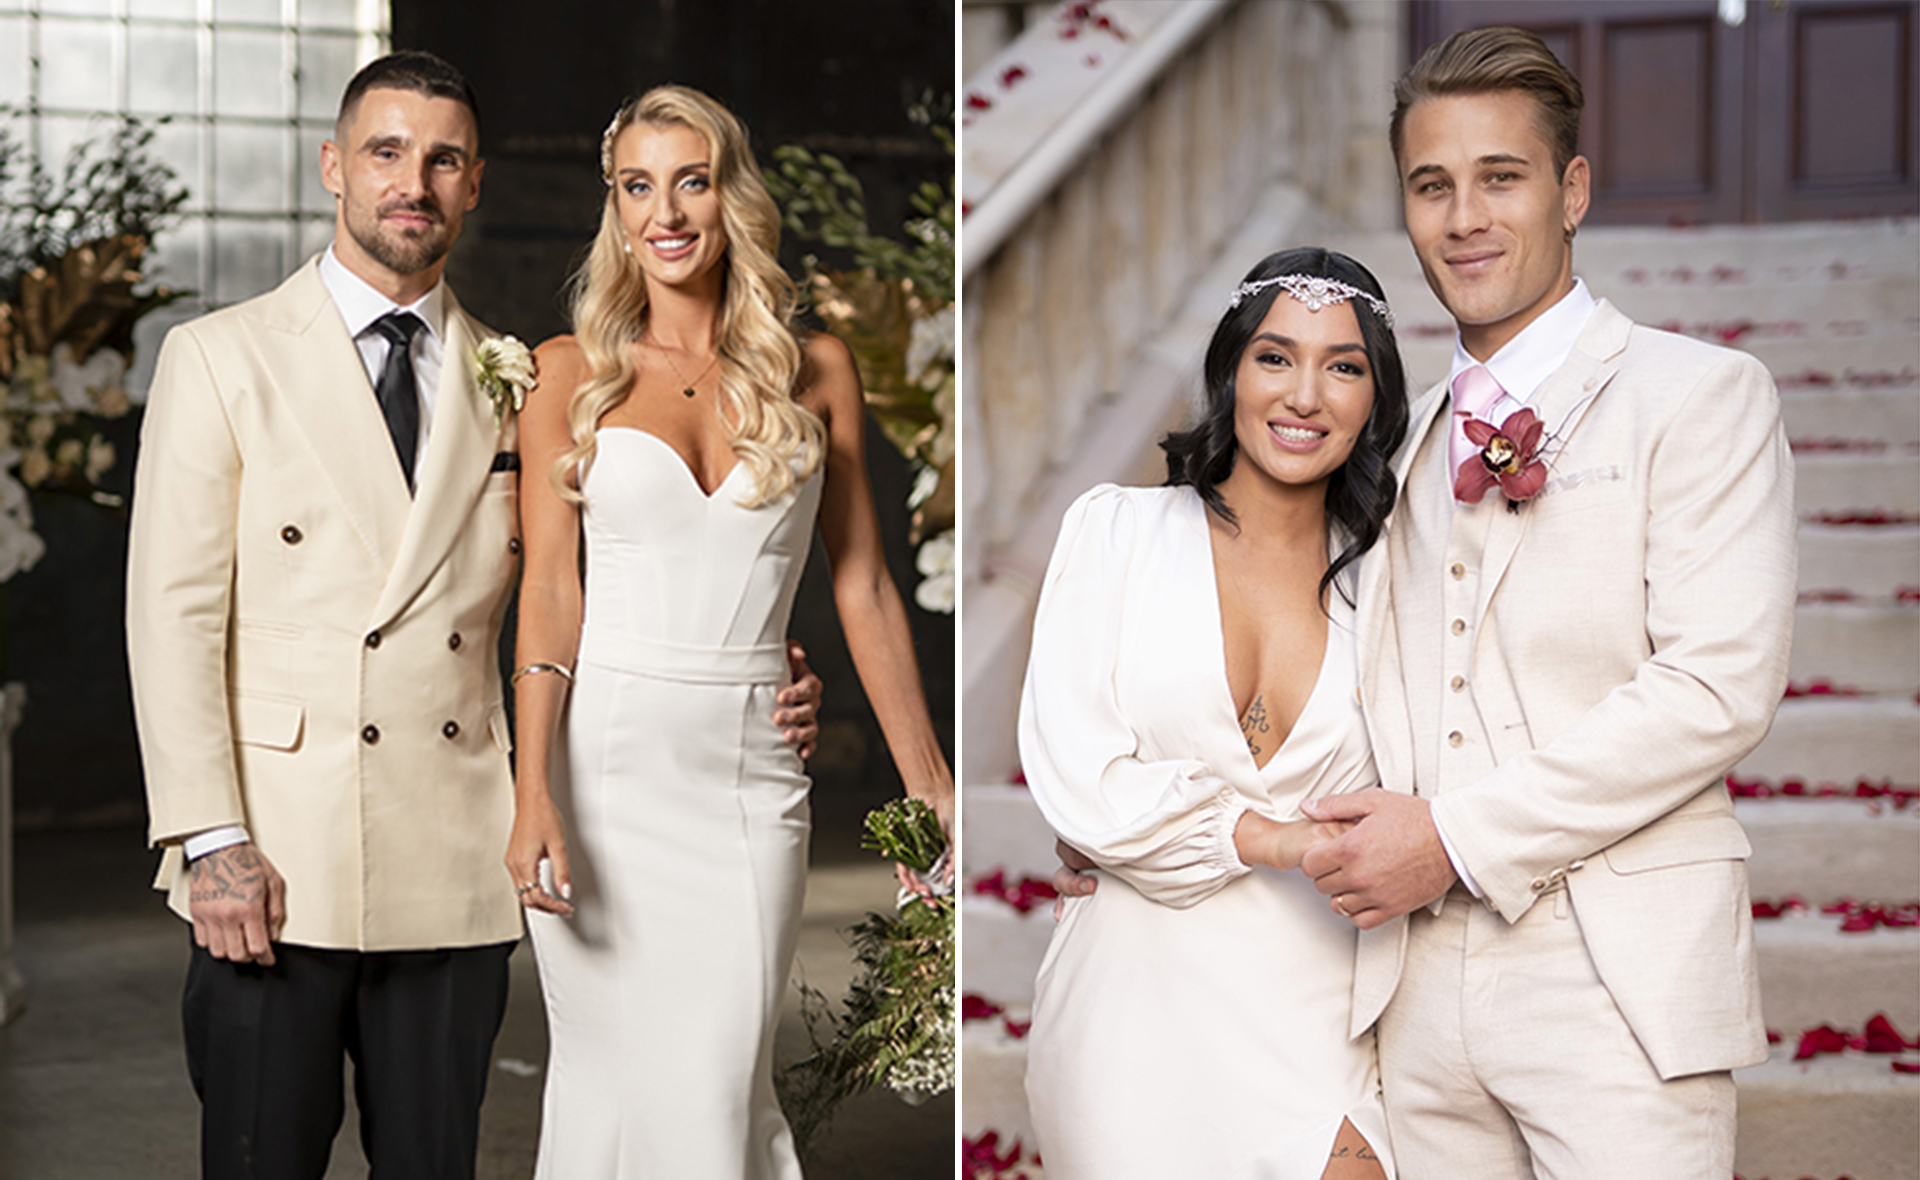 Has the next Martha and Michael just been revealed? Meet the Married at First Sight 2022 couples